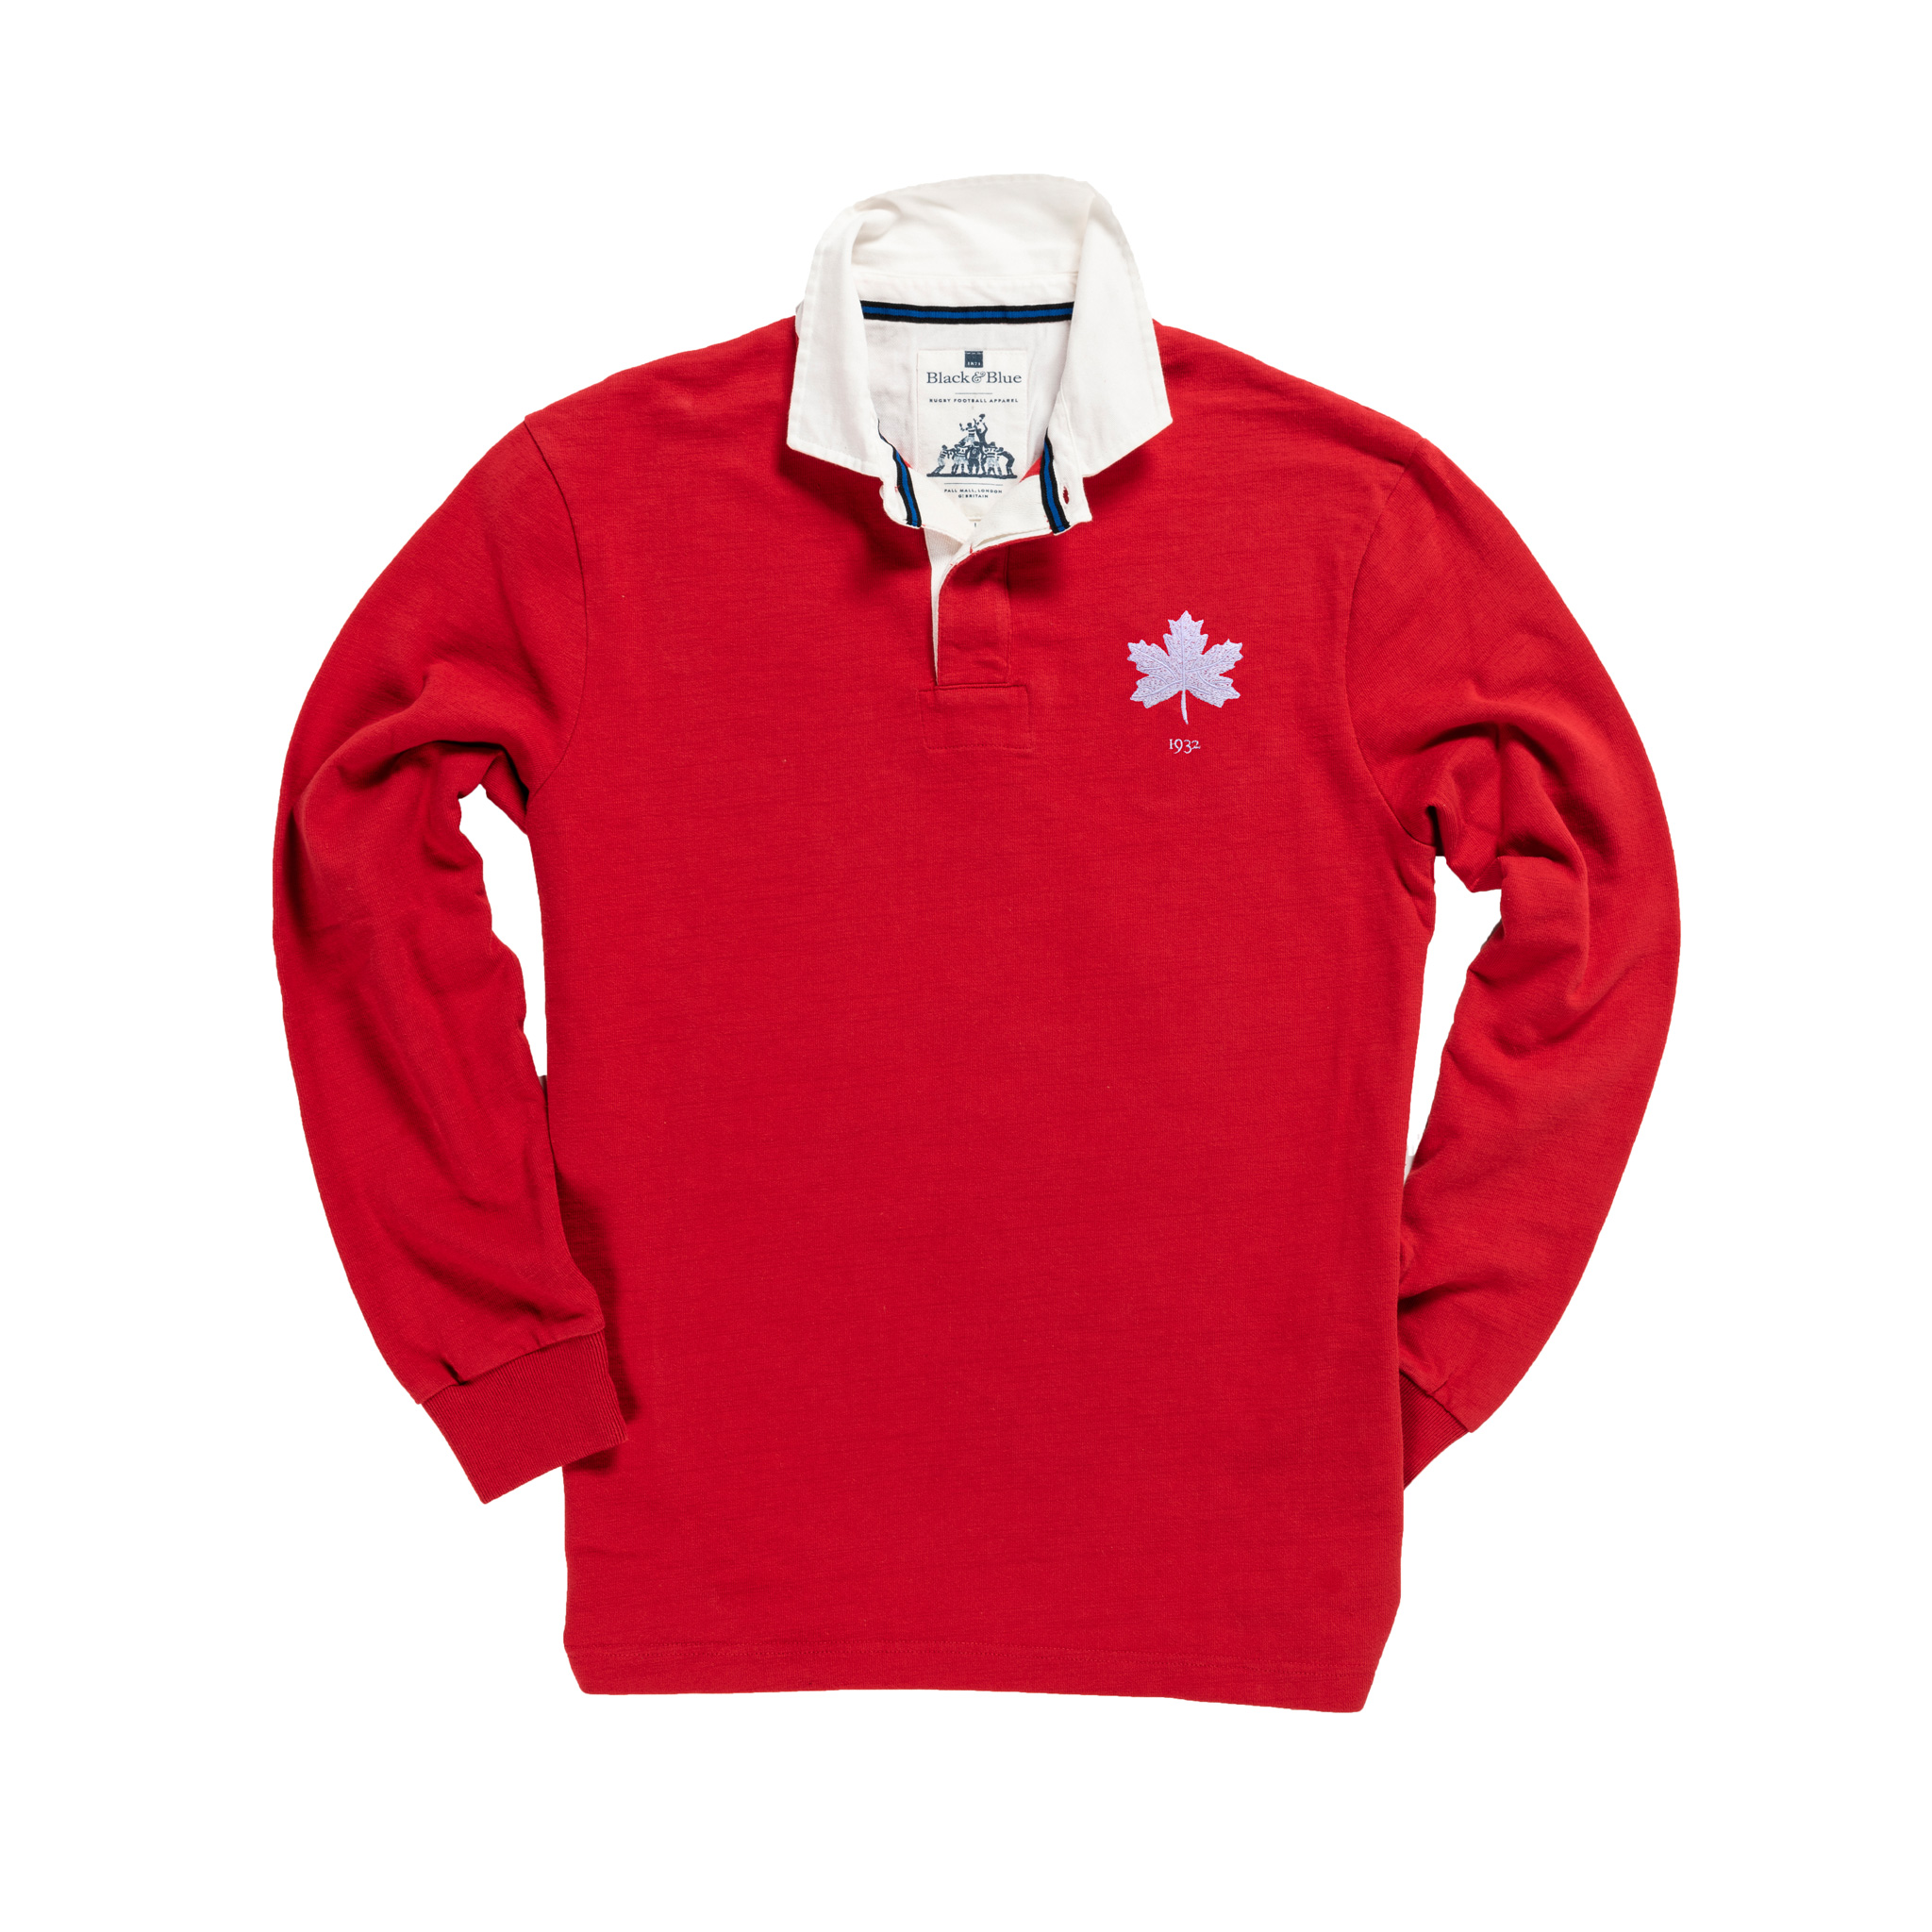 canada rugby jersey 2019